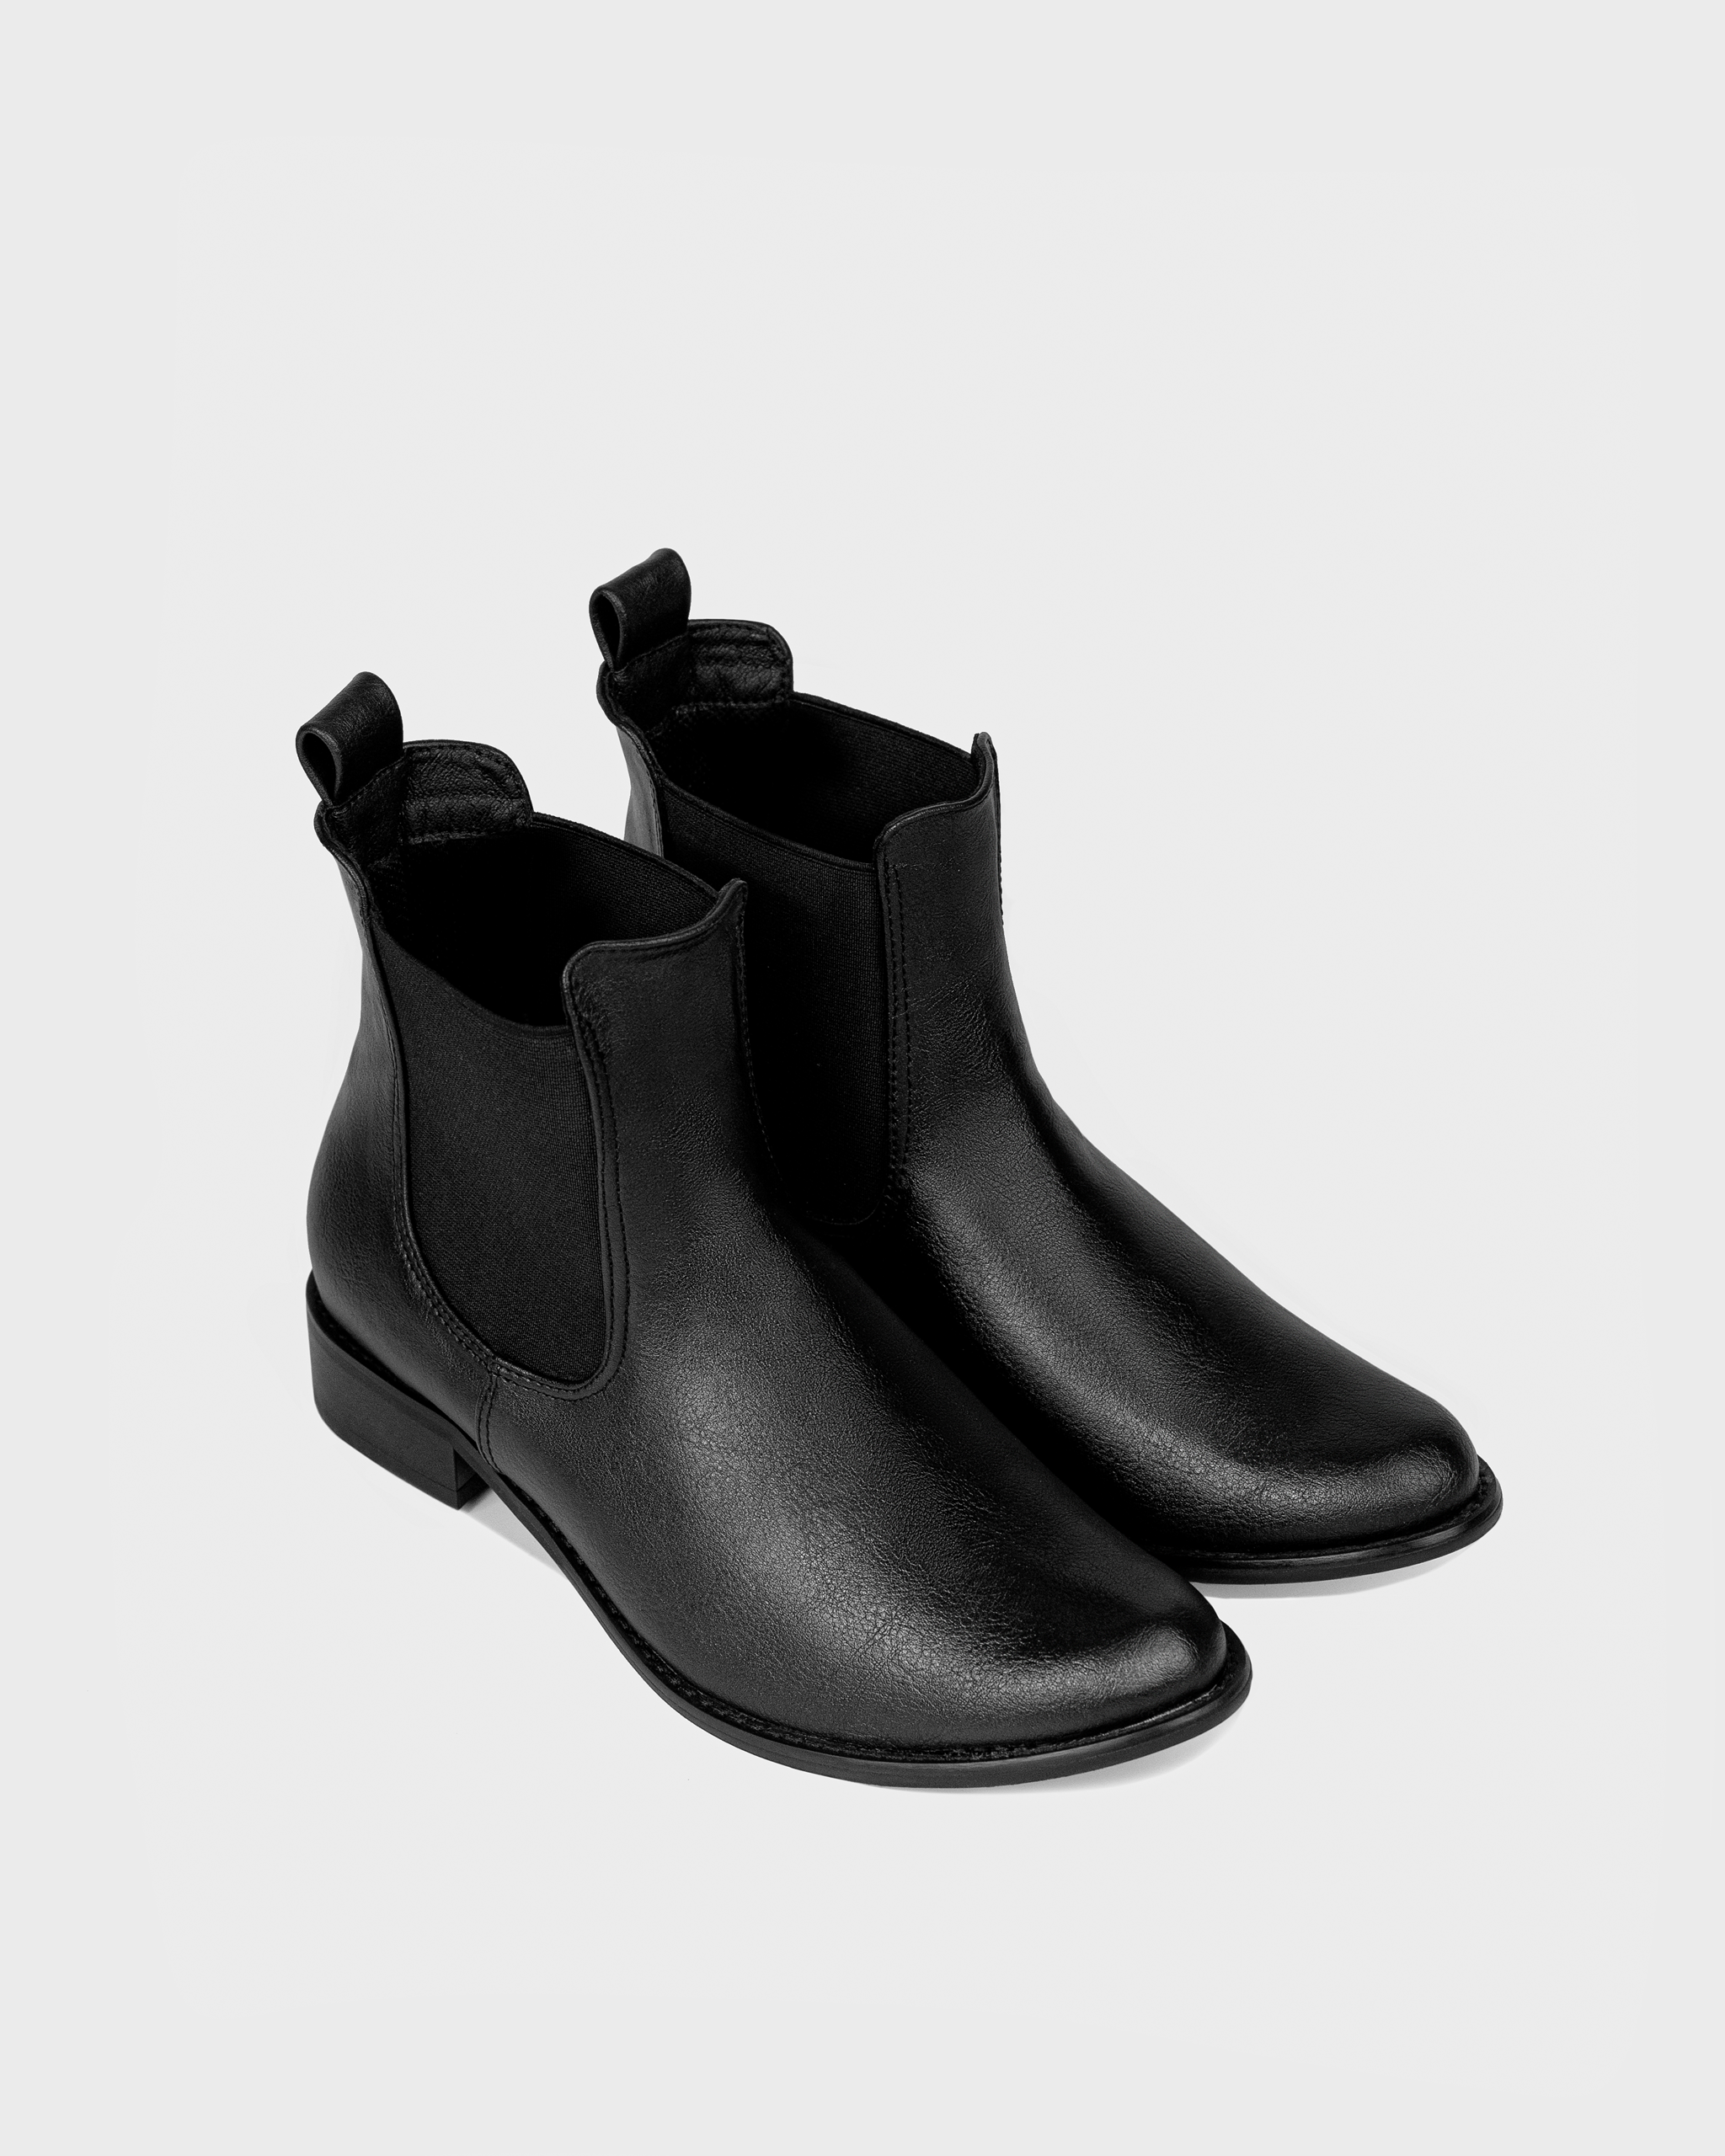 Pinatex® Vegan Leather Ankle Boots Black